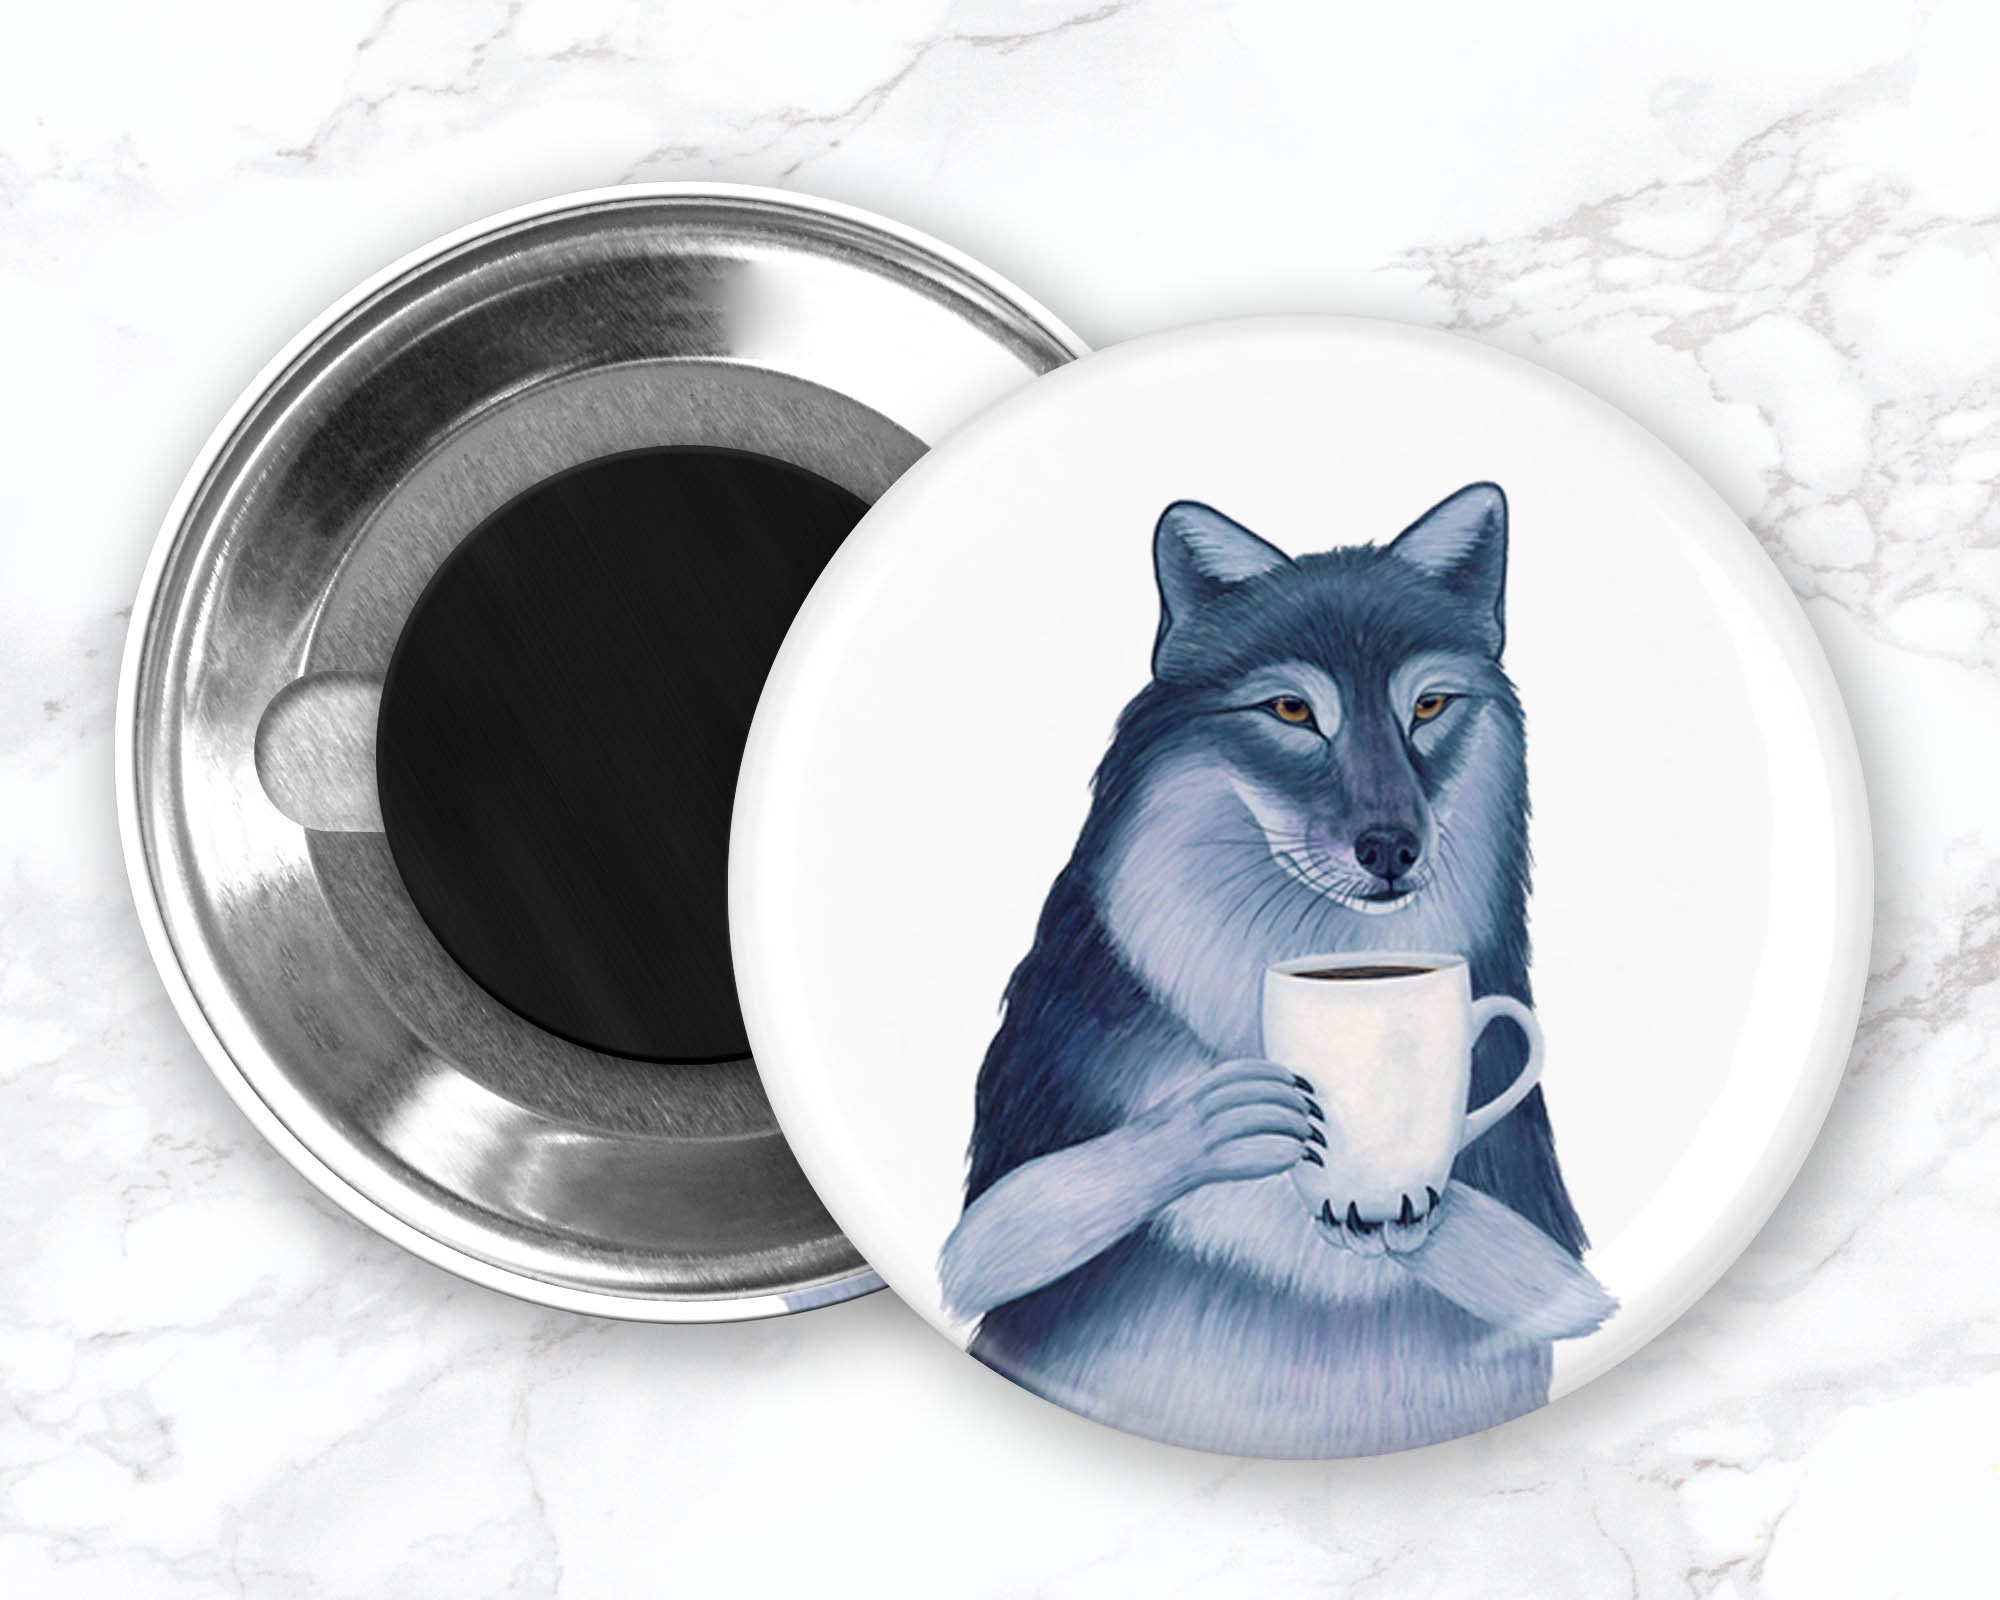 Gray Wolf With Coffee Magnet, Funny Wolf Magnet, Refrigerator Magnets, Funny Fridge Magnets, Kitchen Decor, Animal Magnet